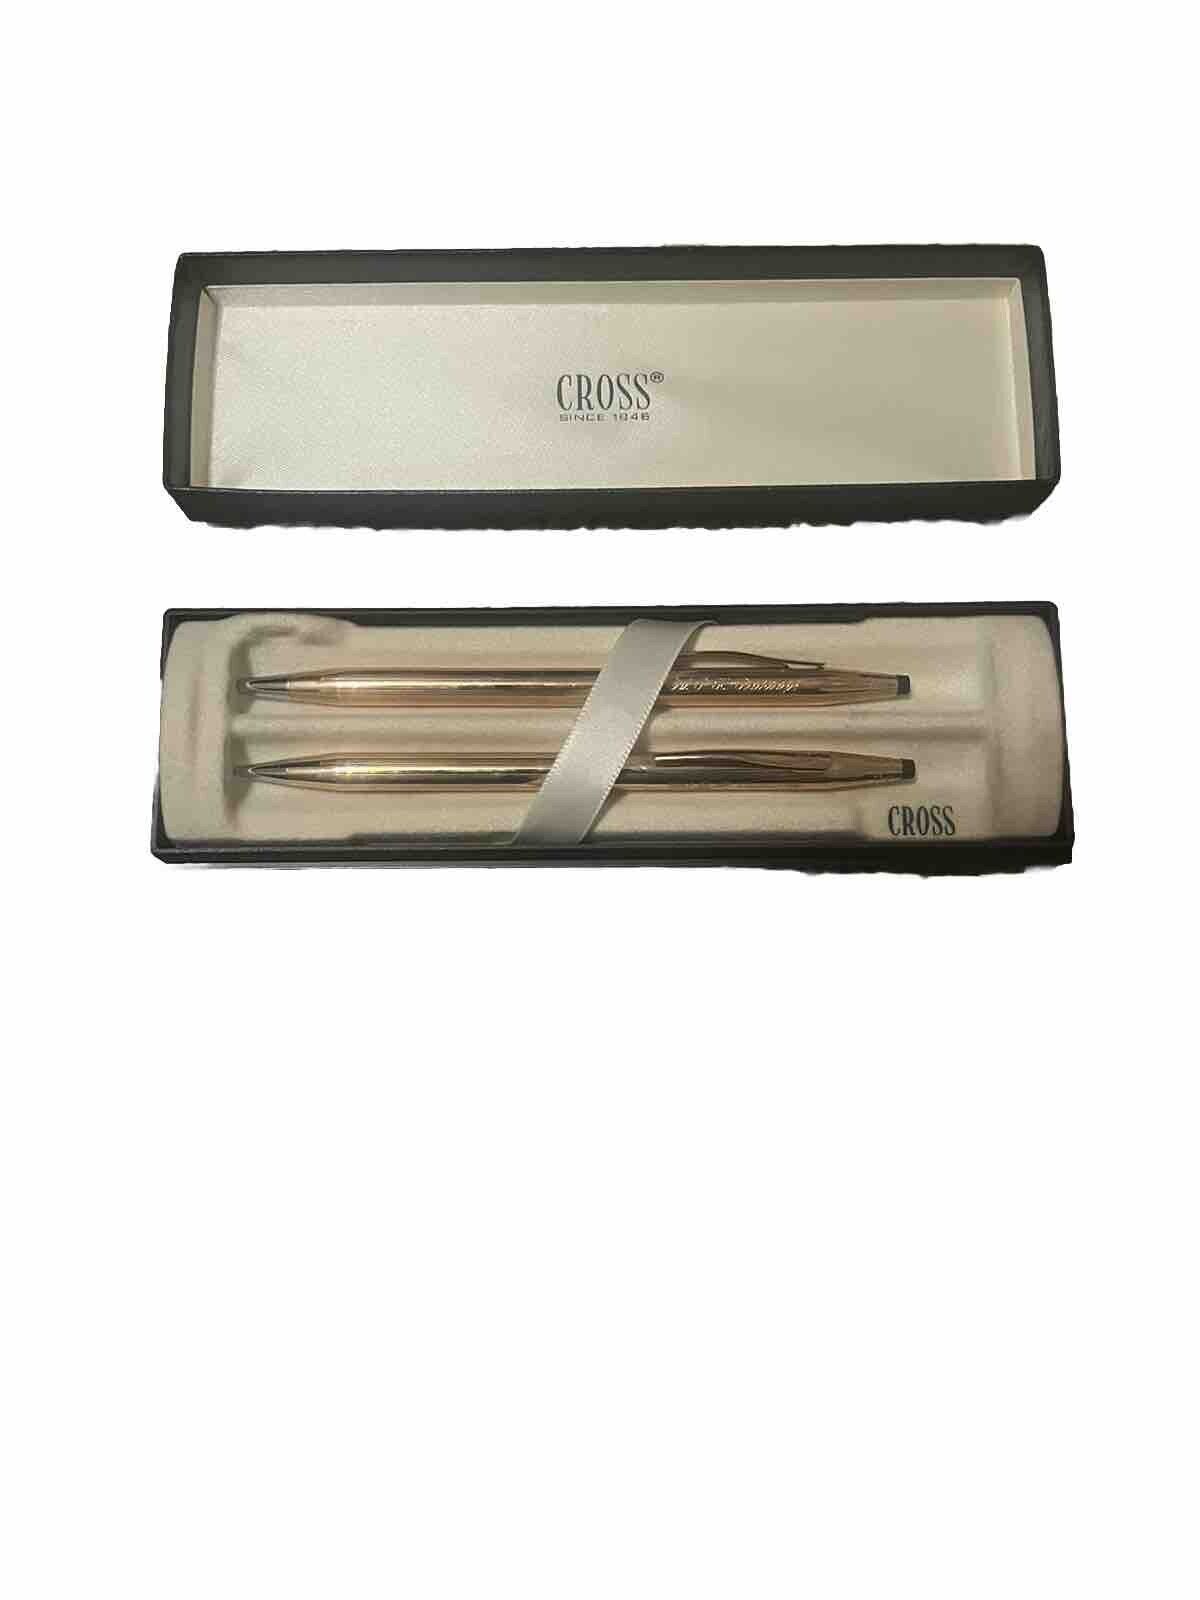 VINTAGE Cross 1/20 14K Gold Filled Pencil Set Great Quality And Great Condition